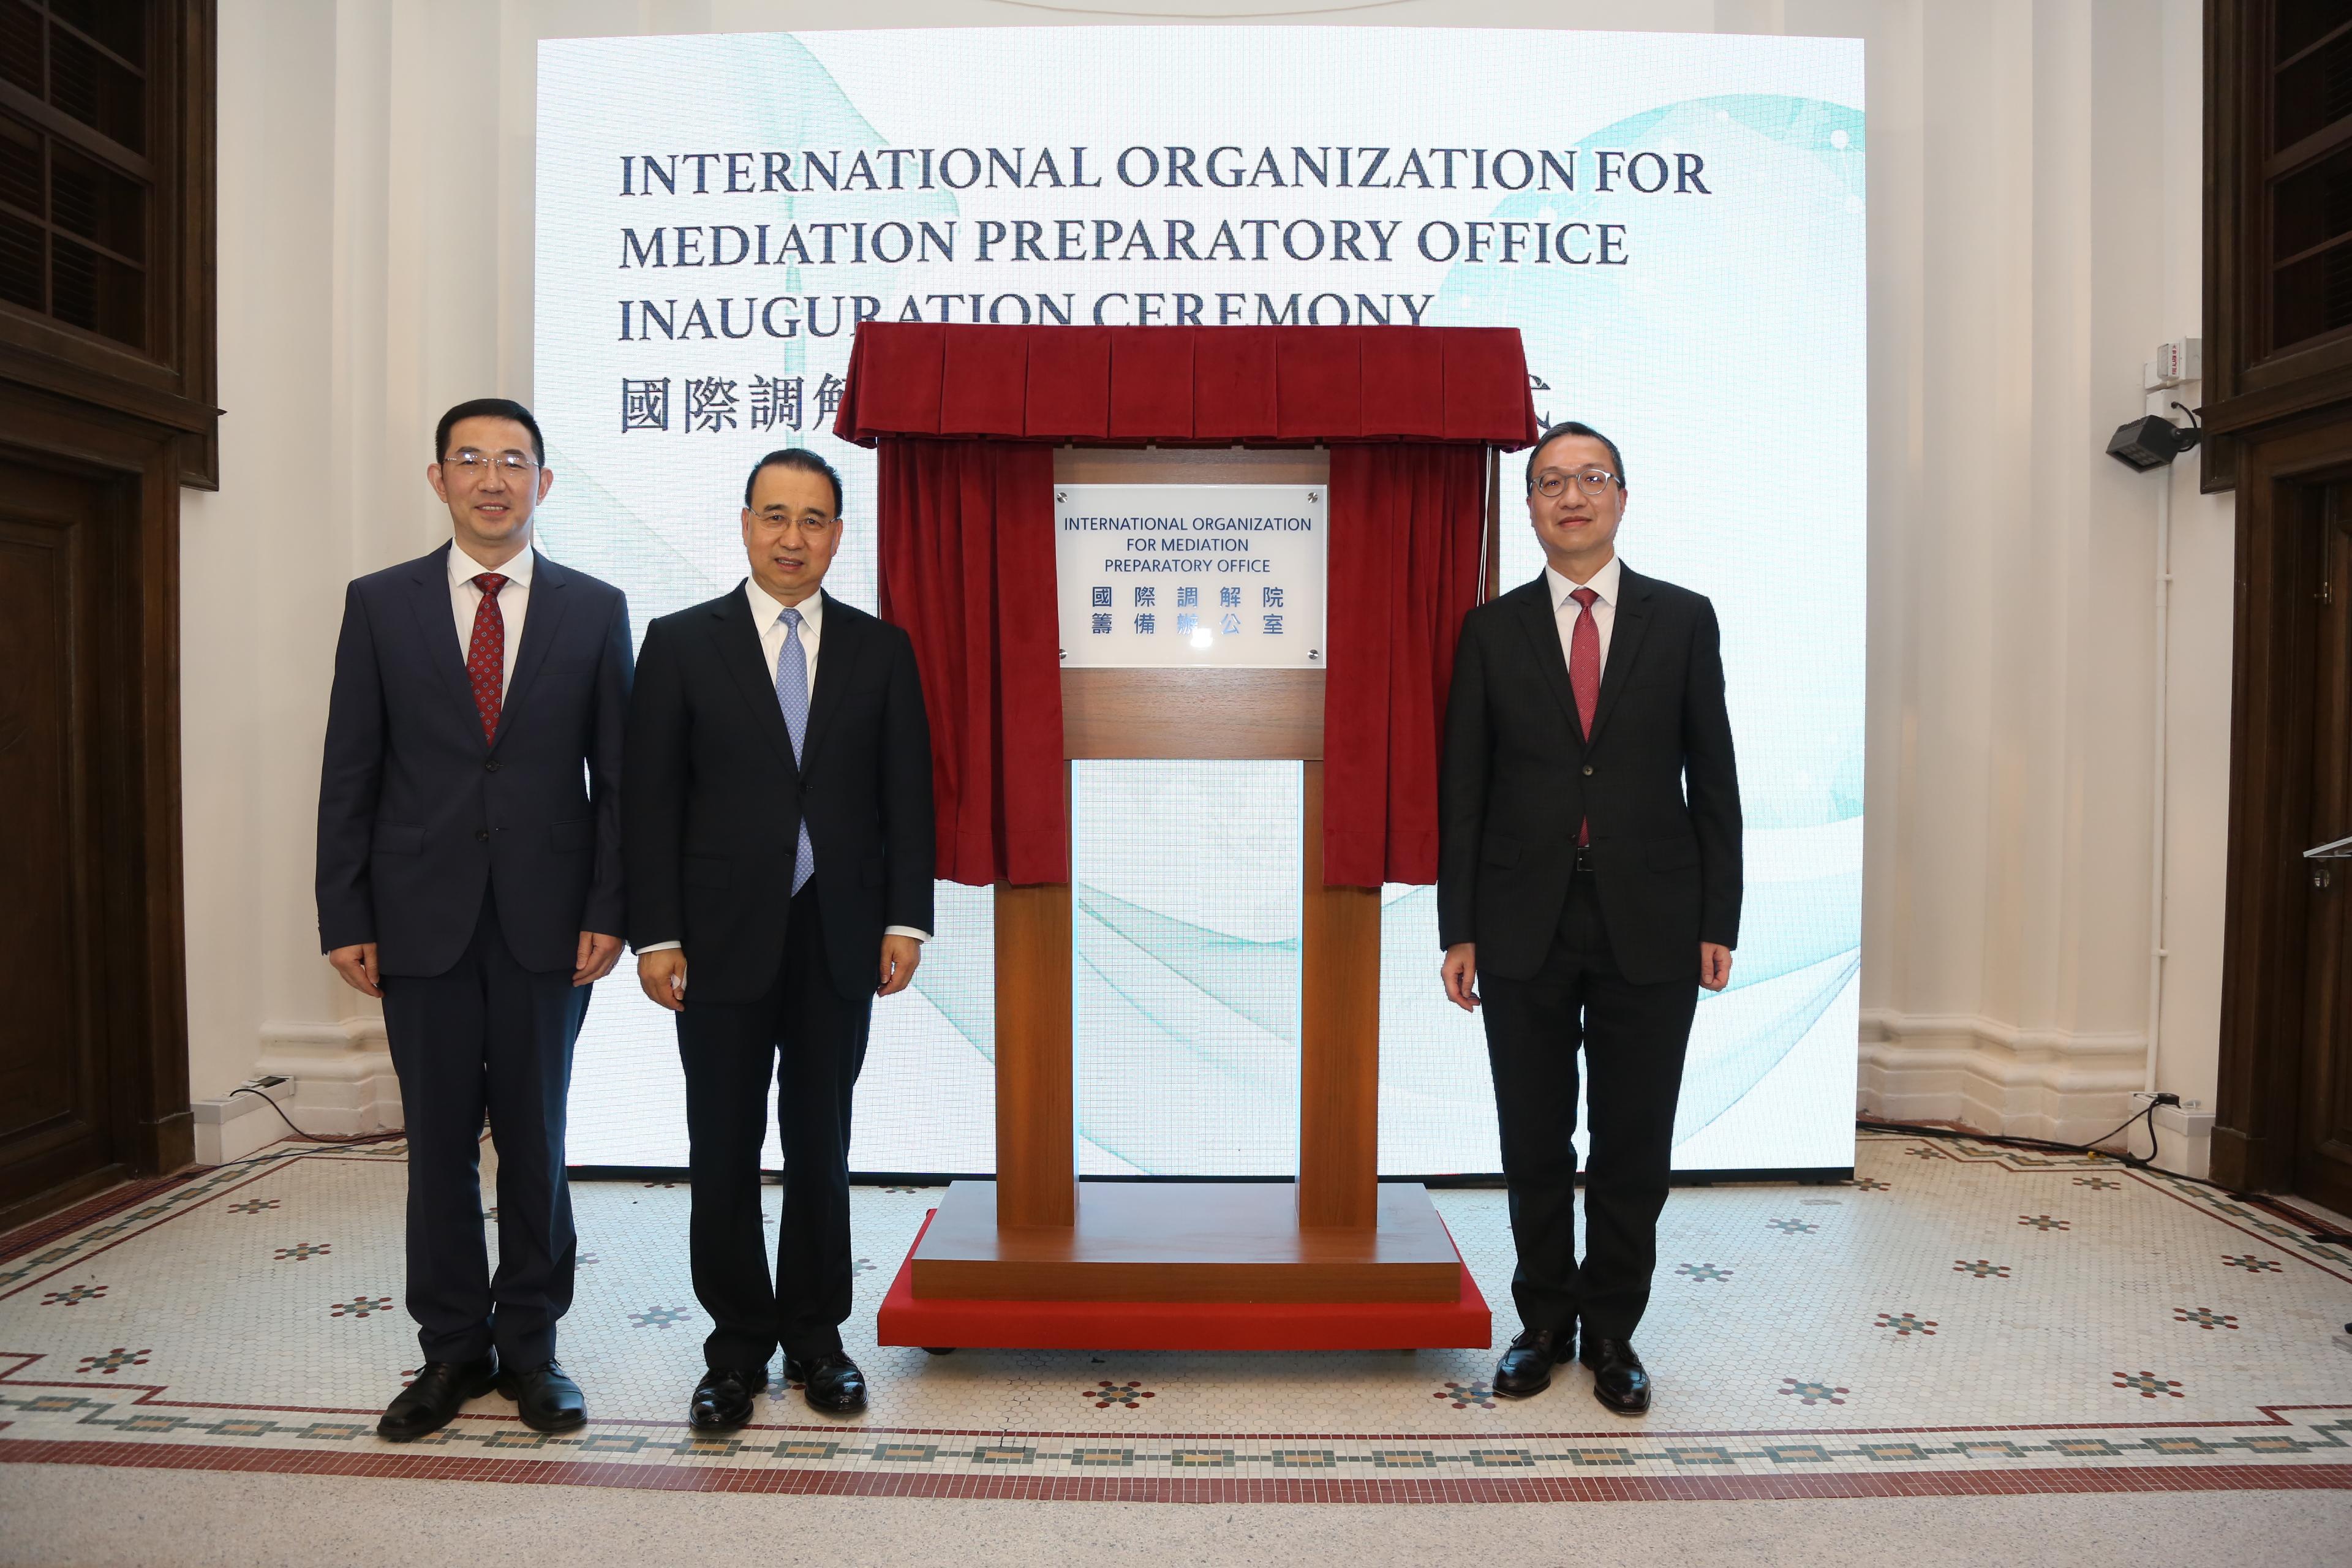 With strong support from the Central People's Government, the inauguration ceremony for the International Organization for Mediation Preparatory Office (IOMed Preparatory Office) was held today (February 16) at the Hong Kong Legal Hub. Photo shows (from left) the Director-General of the IOMed Preparatory Office, Dr Sun Jin; the Commissioner of the Ministry of Foreign Affairs in the Hong Kong Special Administrative Region, Mr Liu Guangyuan; and the Secretary for Justice, Mr Paul Lam, SC, officiating at the plaque unveiling ceremony of the IOMed Preparatory Office.